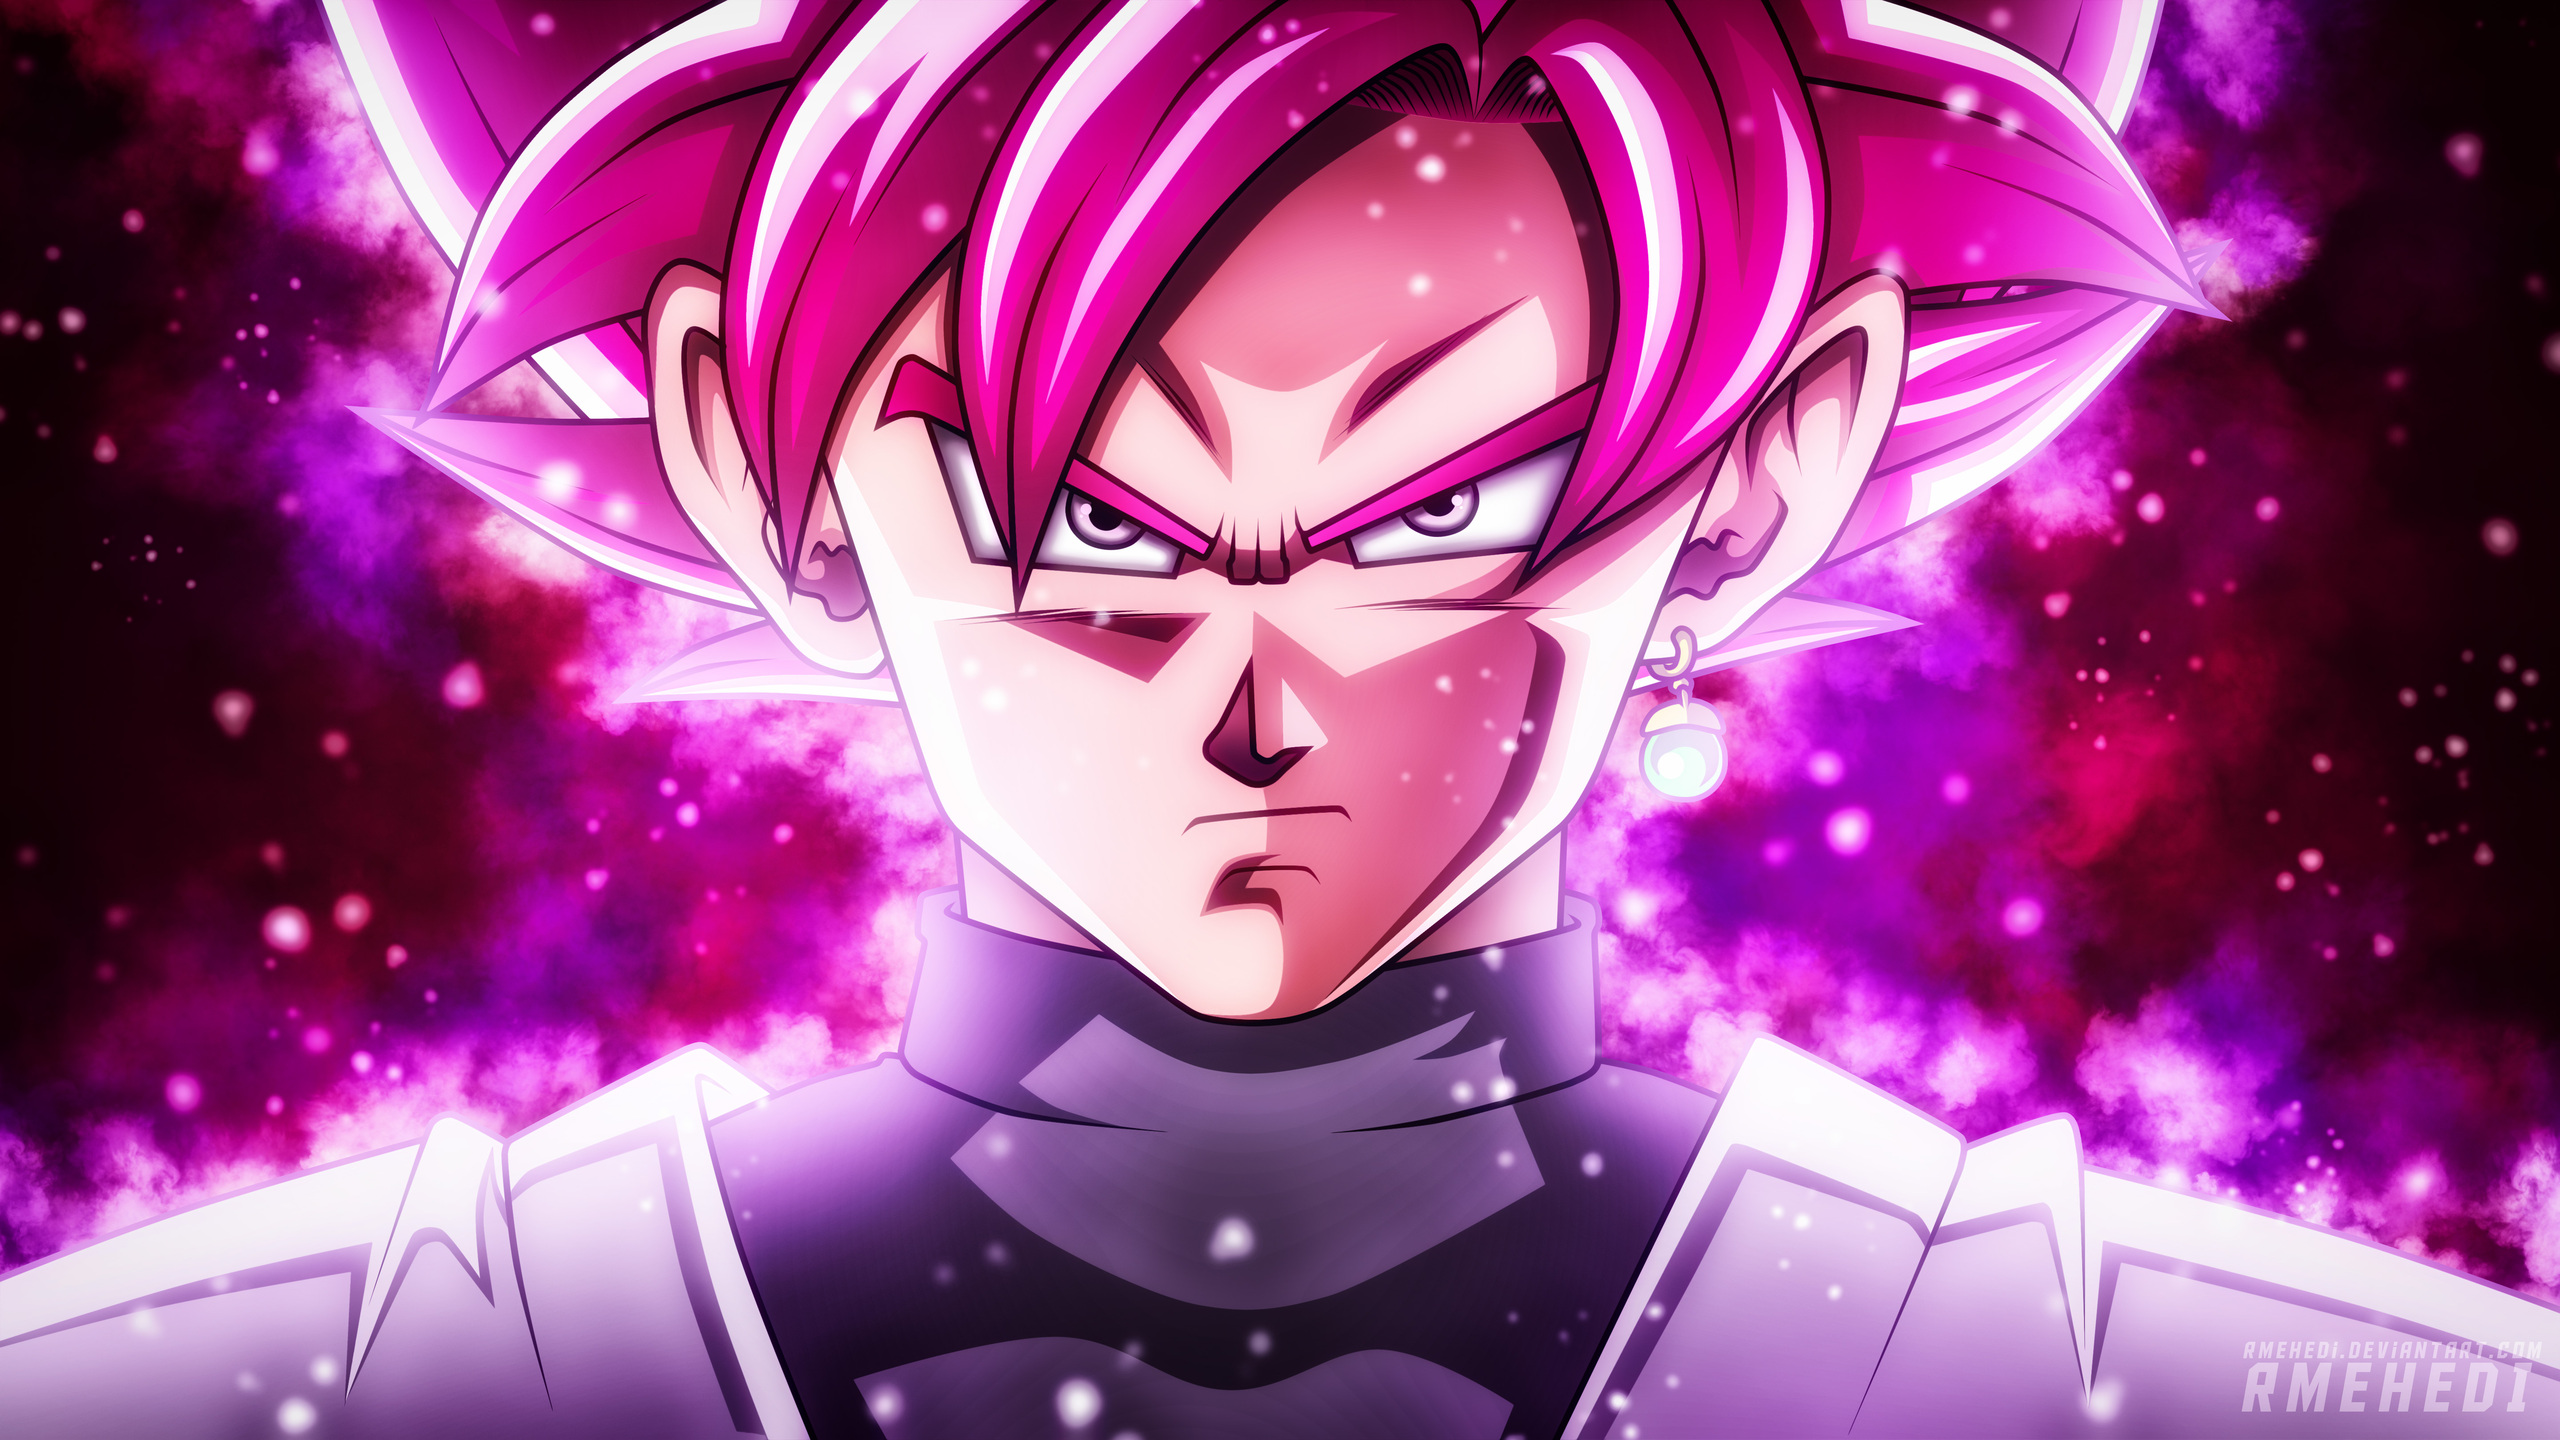 X super saiyan rose bg k p resolution hd k wallpapers images backgrounds photos and pictures